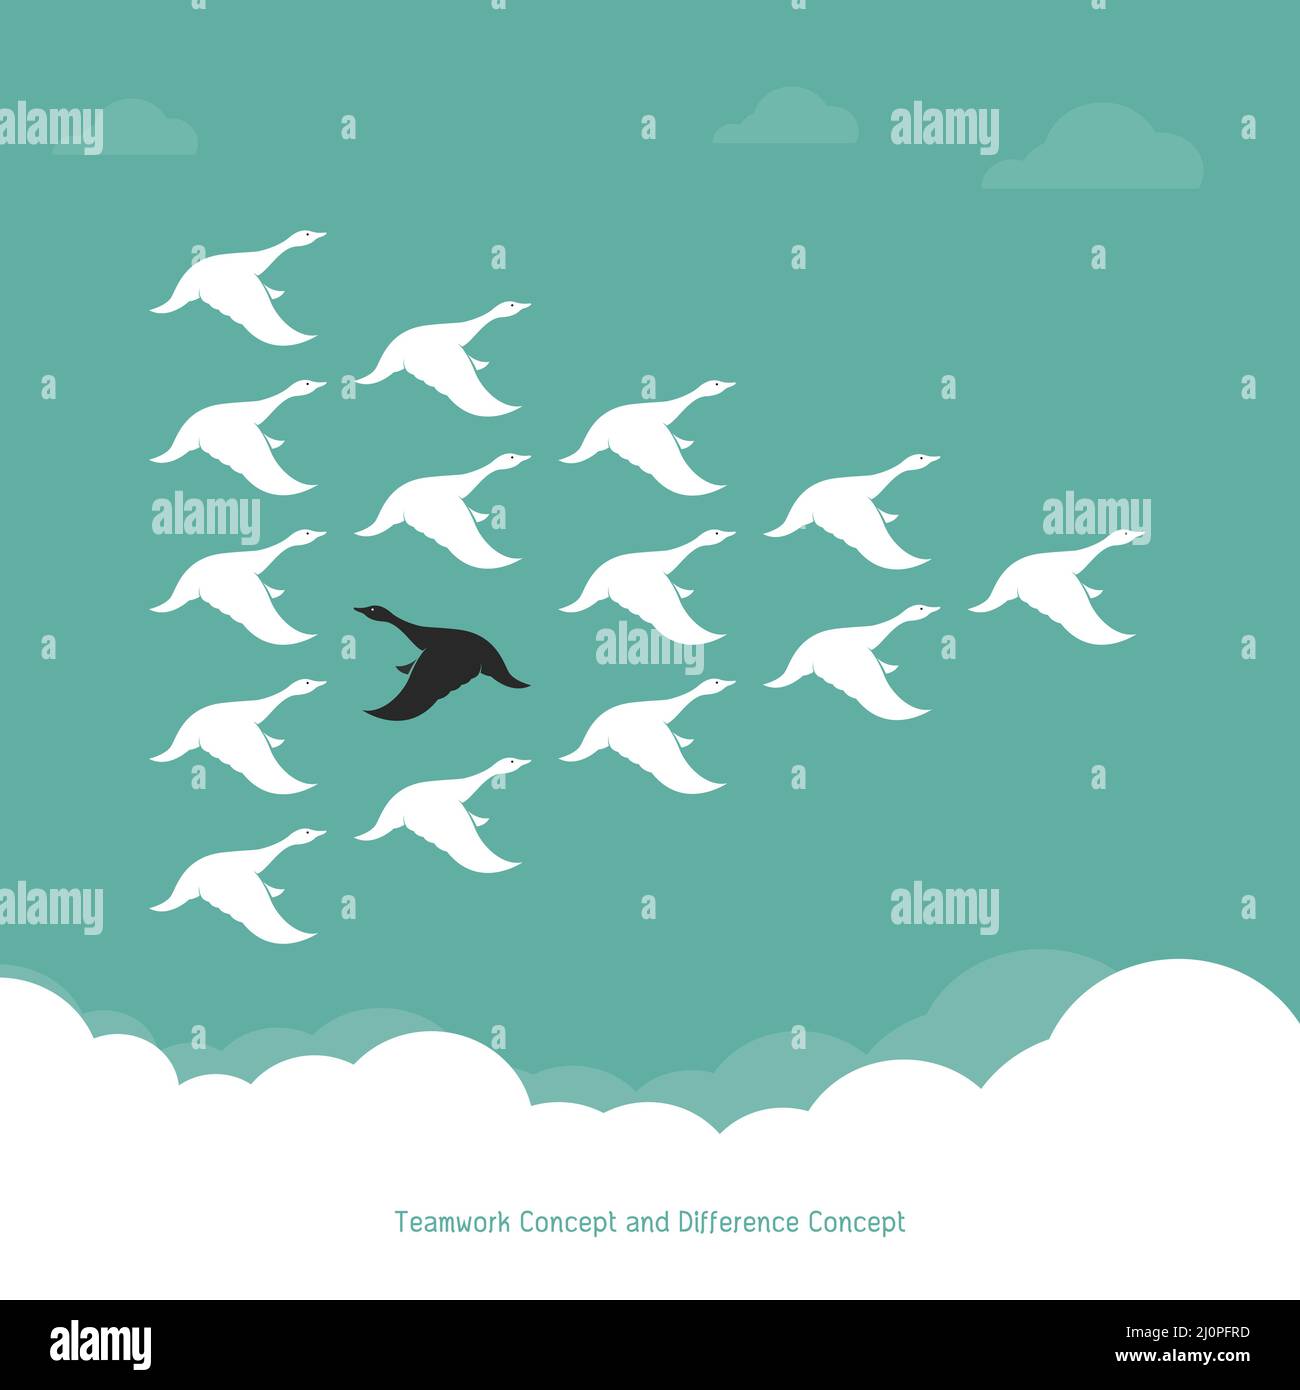 Flock of a duck flying in the sky., Teamwork Concept and Difference Concept.., Wild duck. Easy editable layered vector illustration. Stock Vector